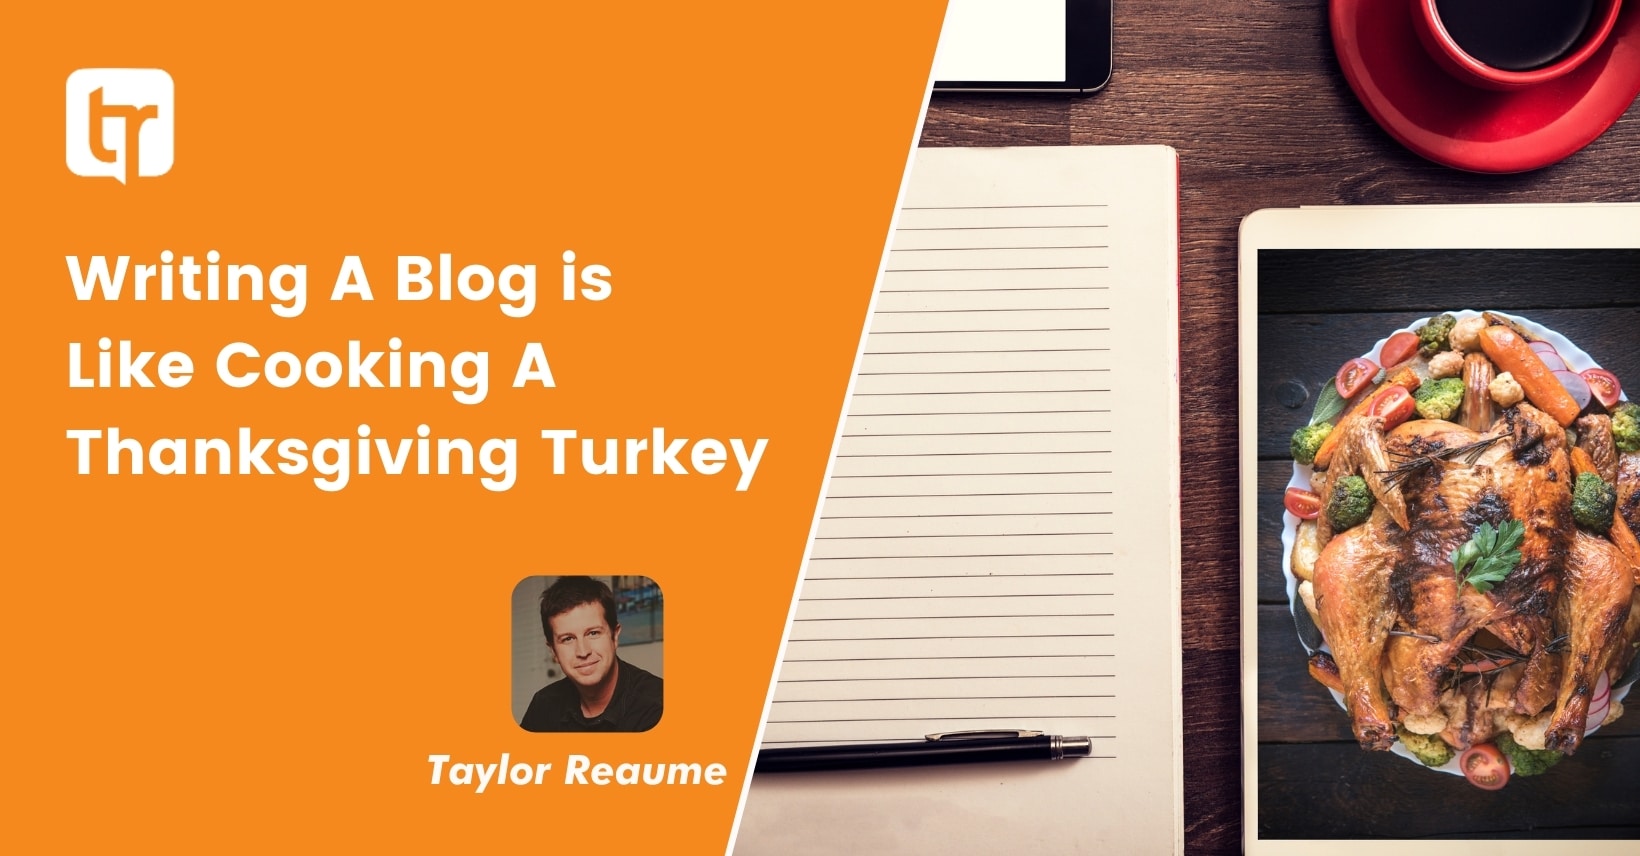 Writing A Blog is Like Cooking A Thanksgiving Turkey